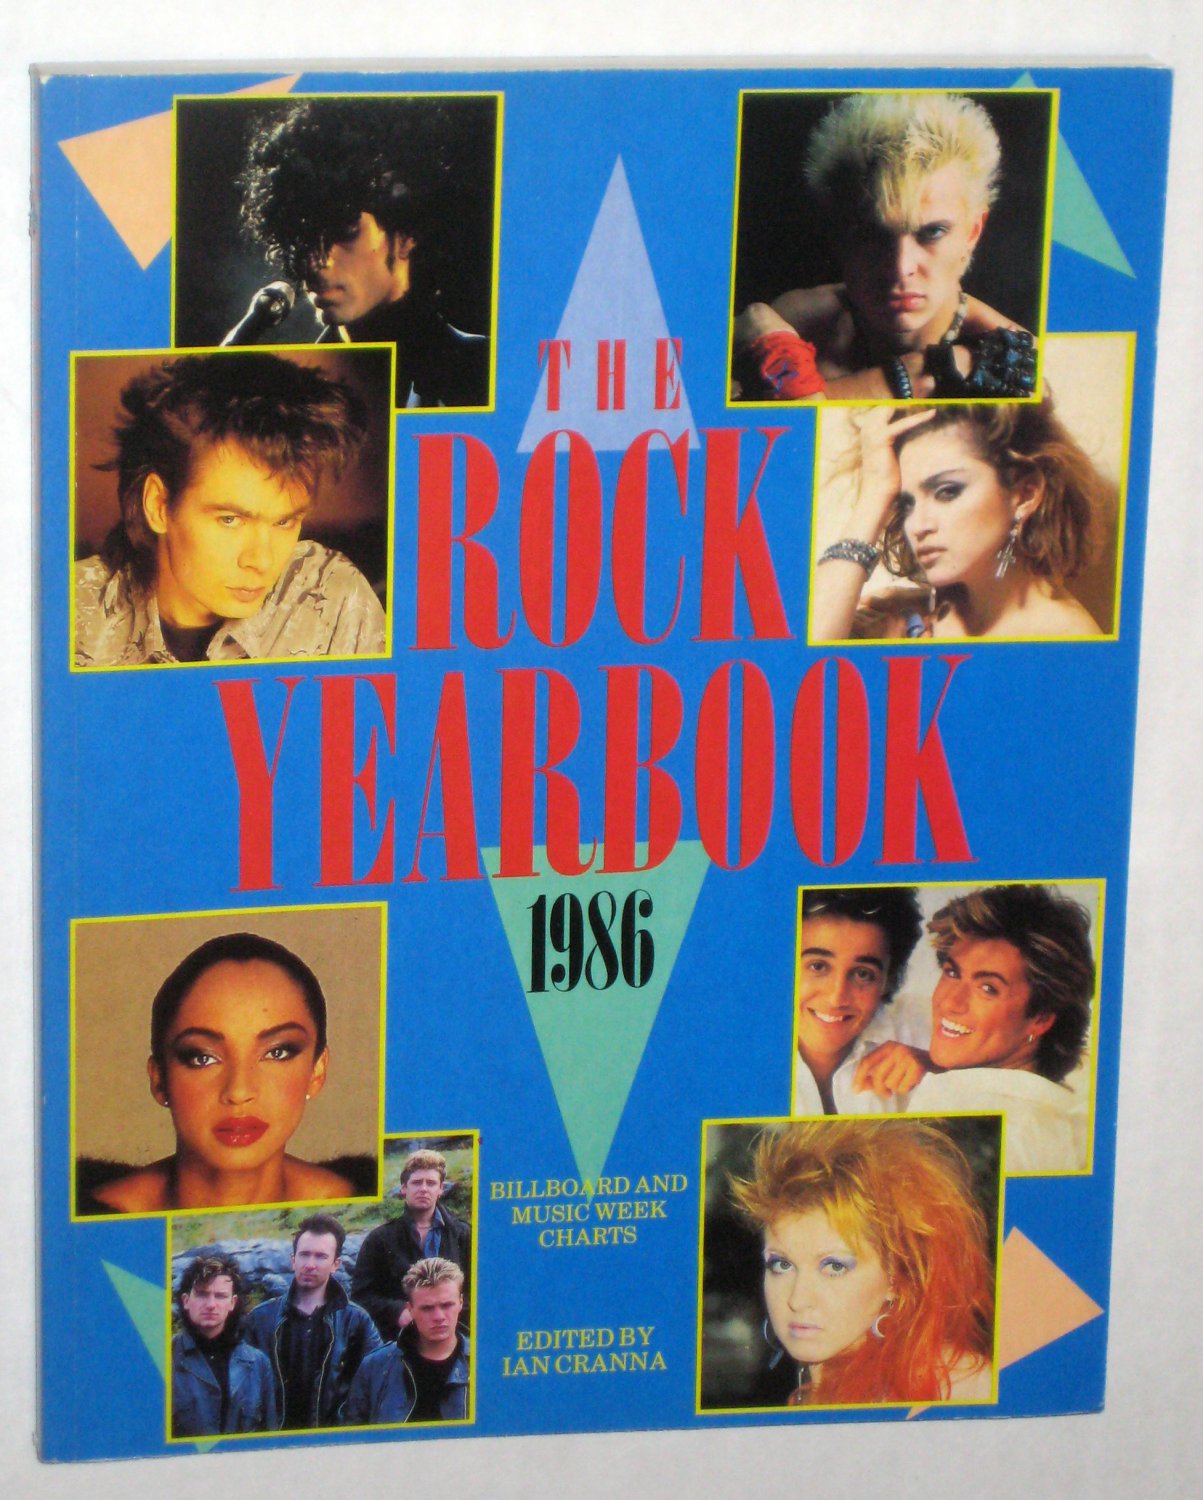 The Rock Yearbook 1986 Softcover Paperback Prince Madonna Sade Year Book Rock and Roll